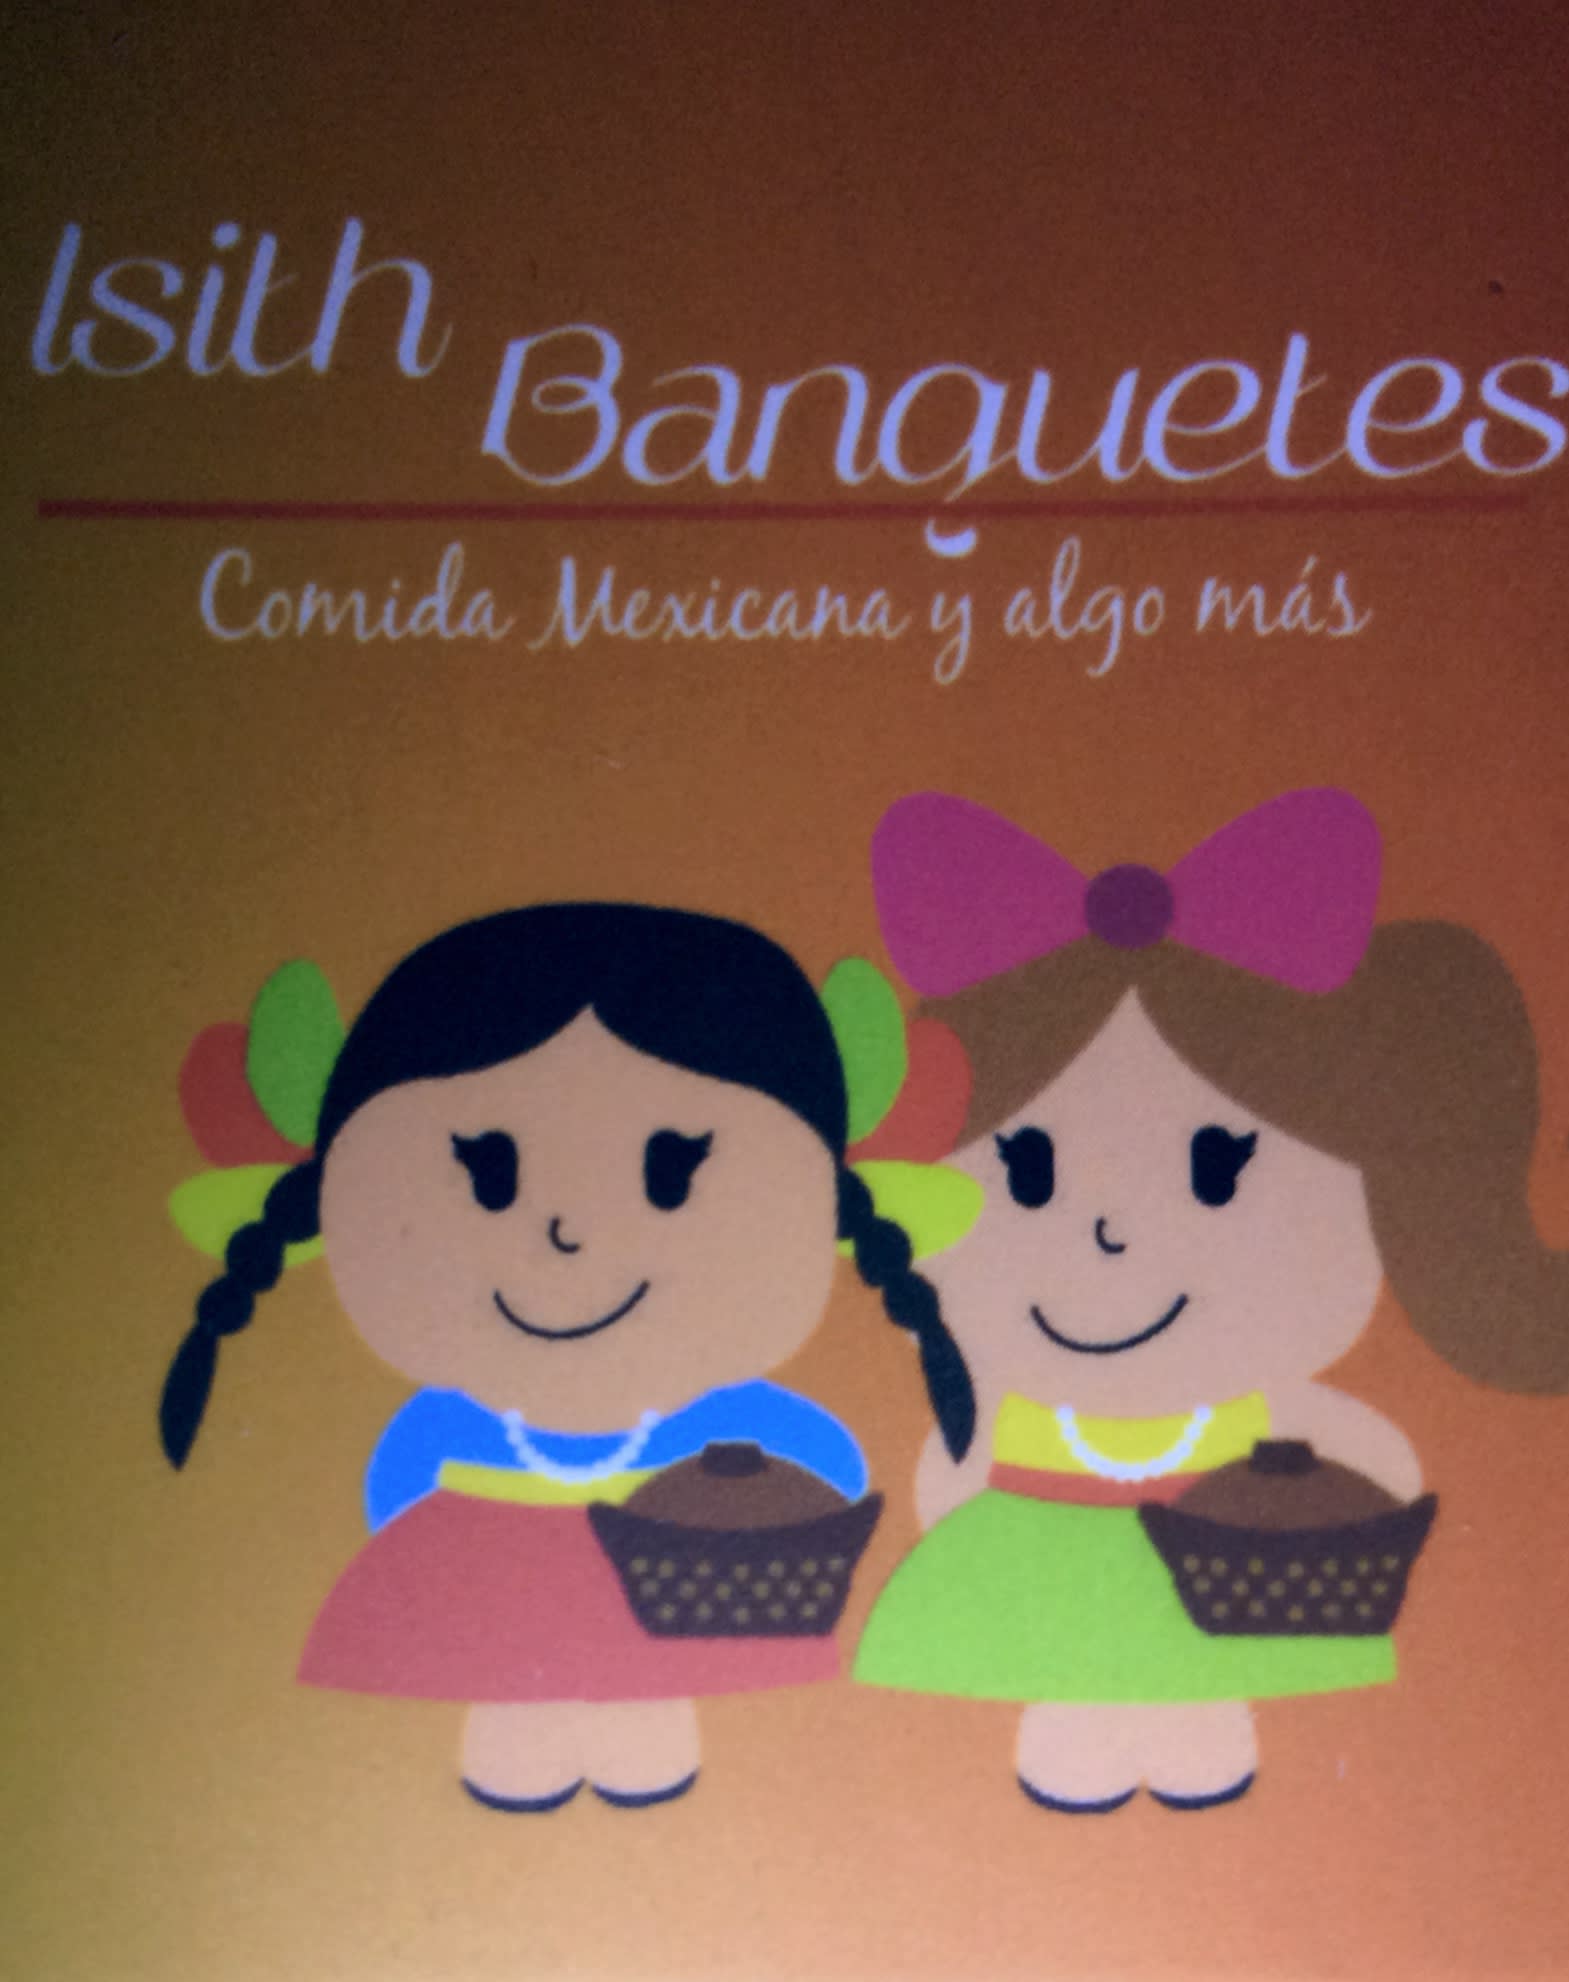 Isith Banquetes